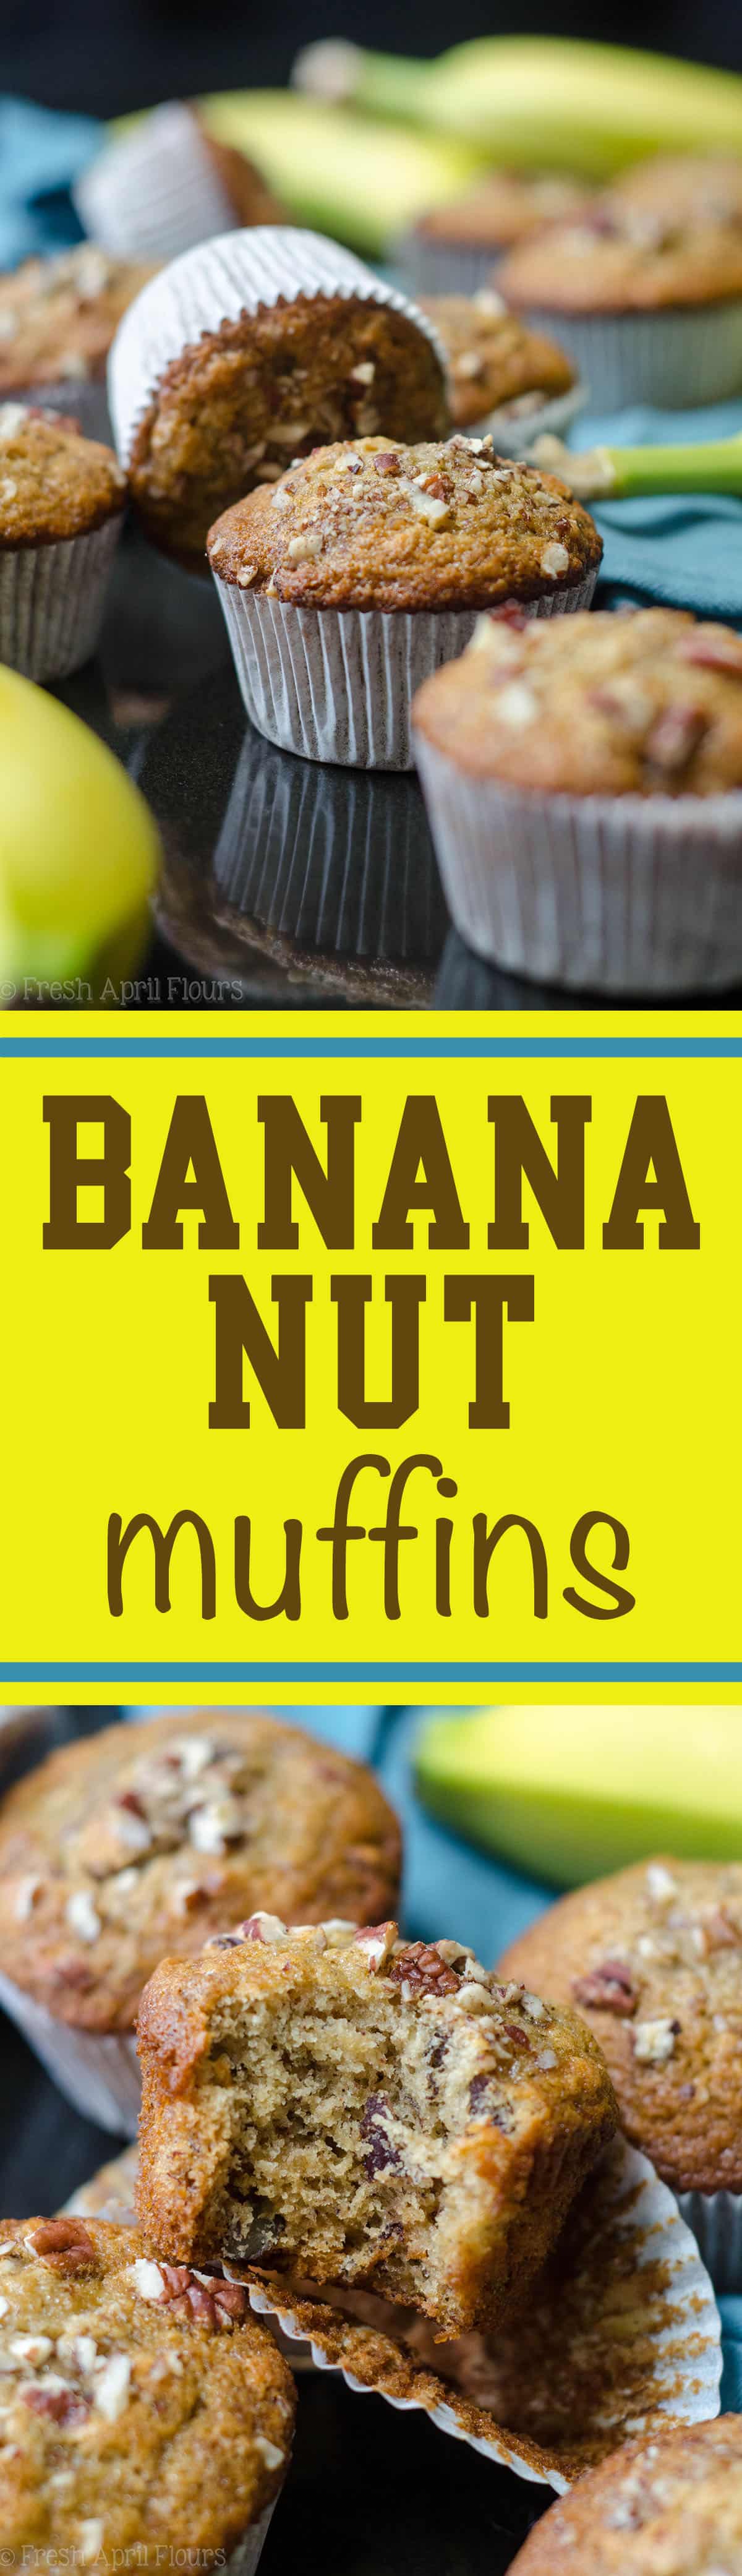 This simple banana muffin recipe is the perfect way to use ripe bananas for a quick and easy addition to breakfast or a simple snack. You can make these banana bread muffins with or without nuts. via @frshaprilflours